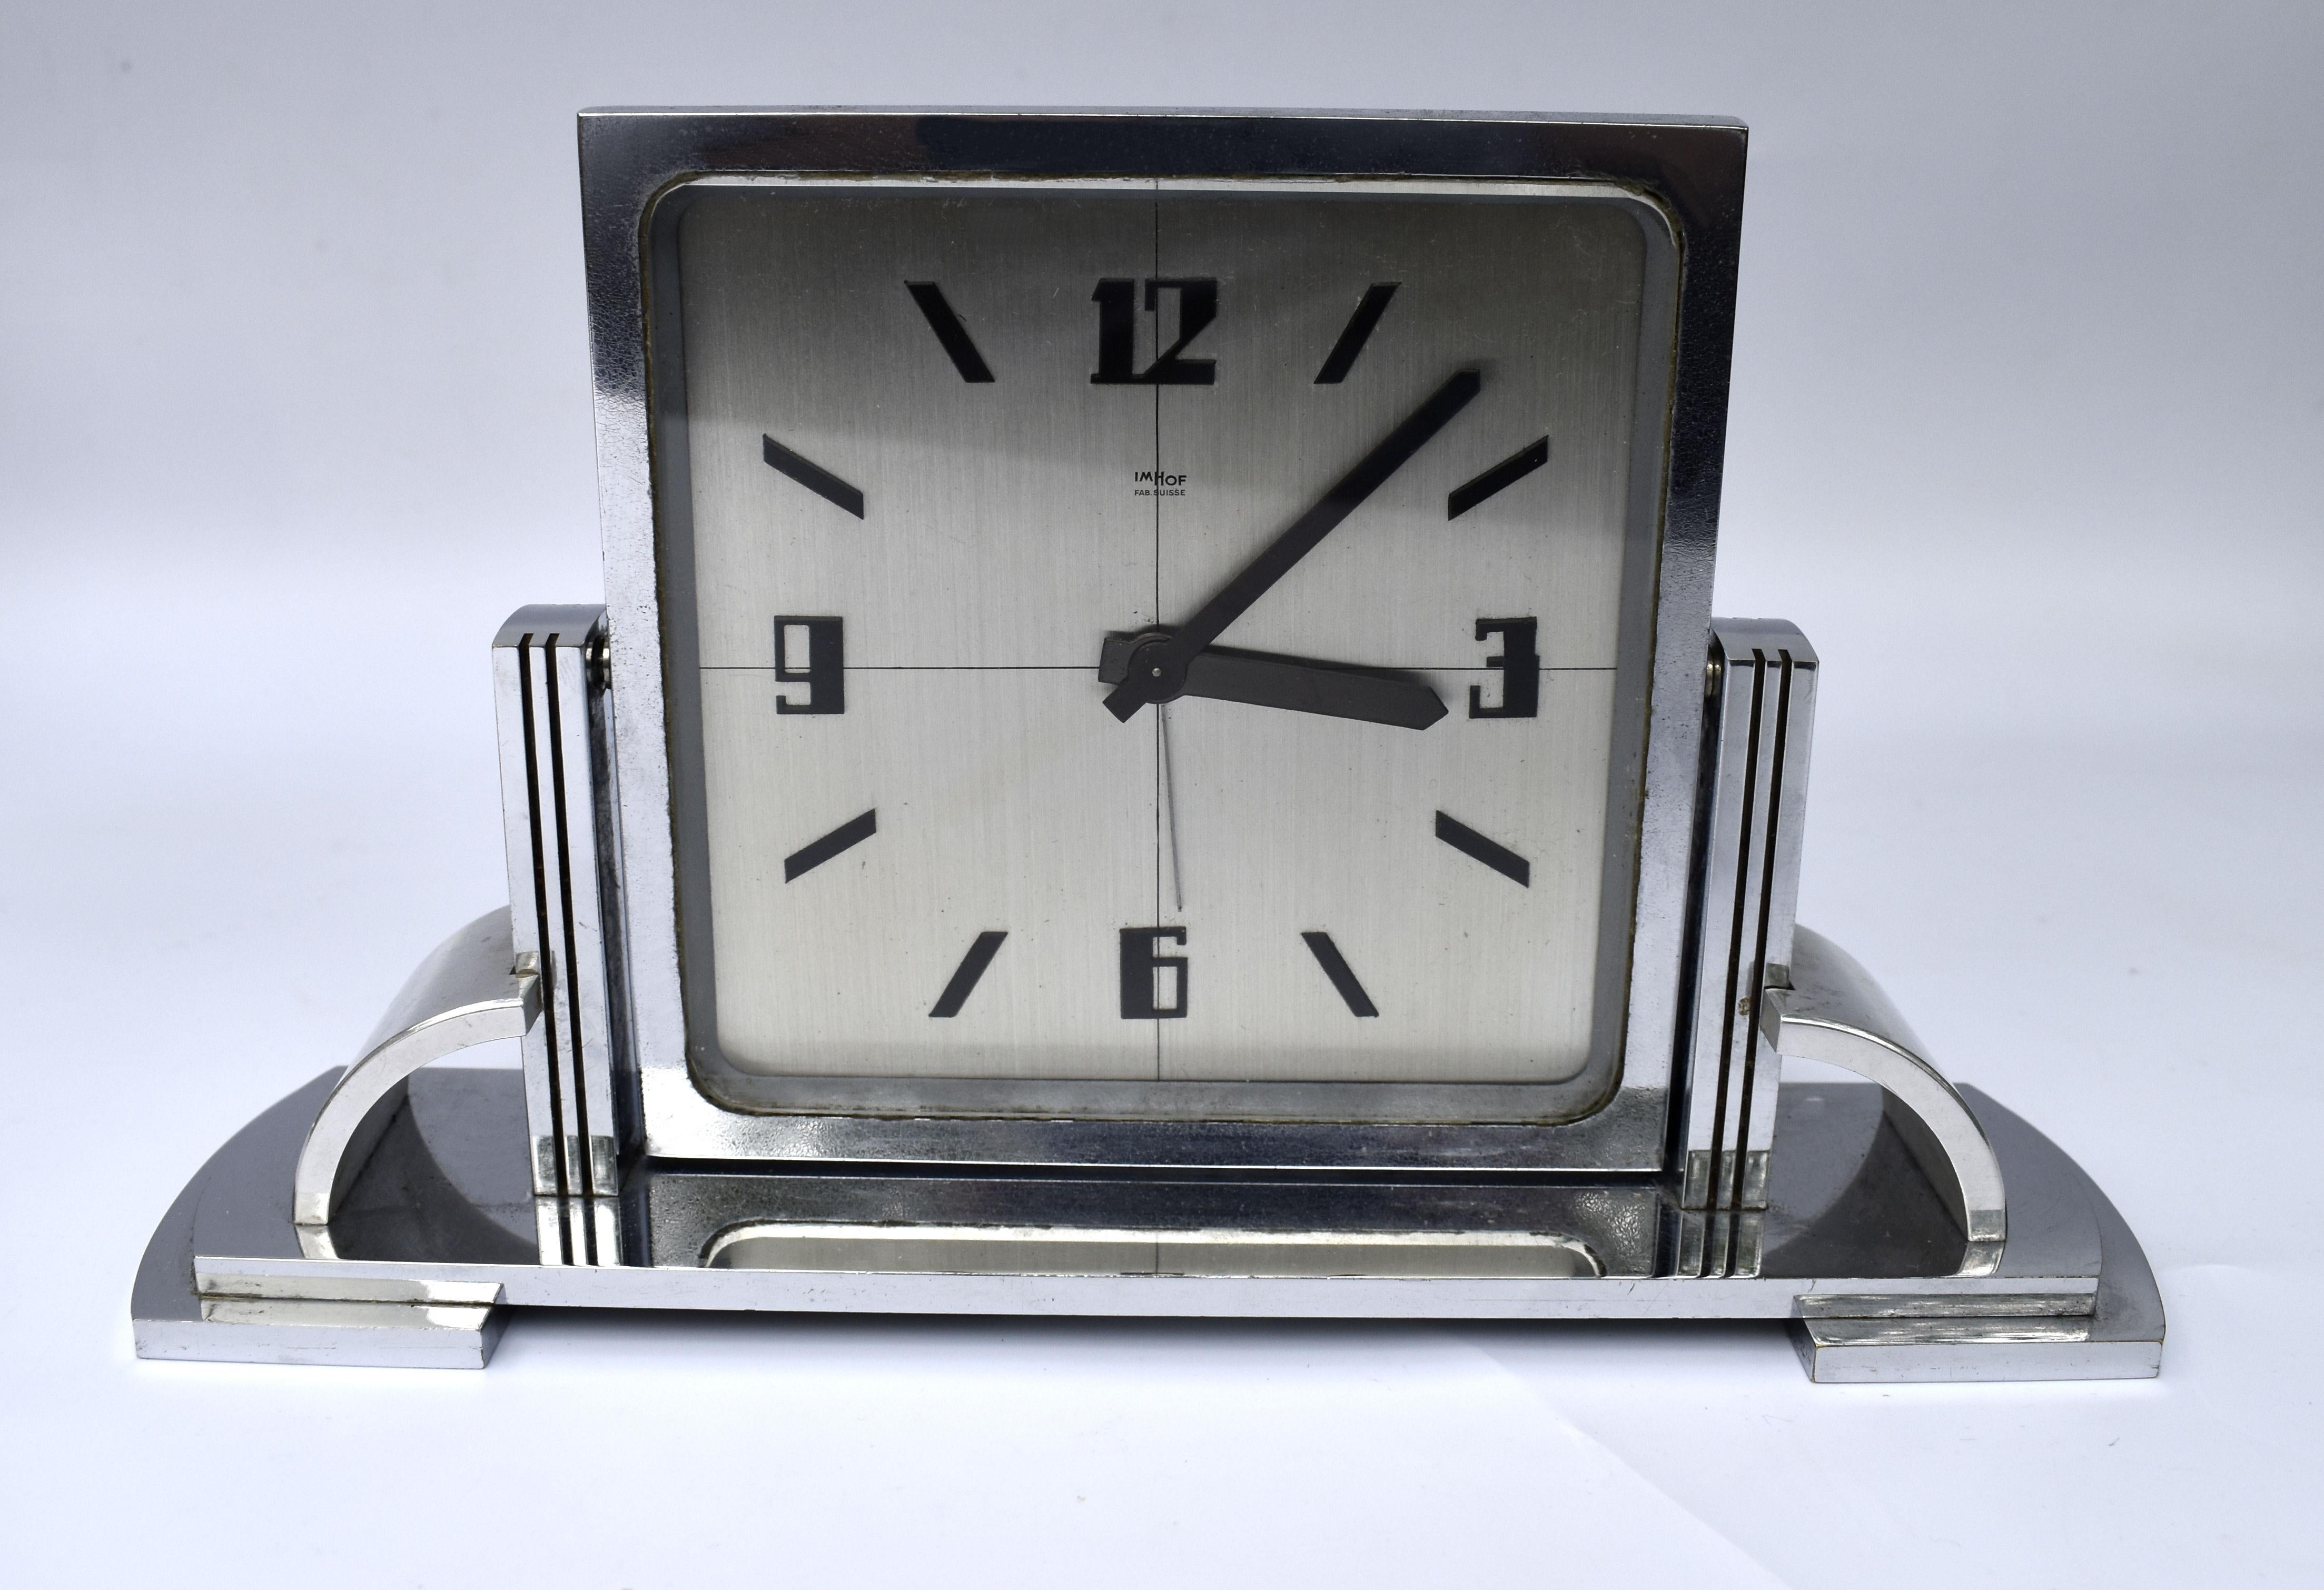 Wonderful quality Swiss Art Deco clock from the house of Imhof in Switzerland, dating to the 1930's. Chromed bronze case, showing some ware but nothing too unsightly. Superb styling and good size for desk or mantle area. We've had this clock